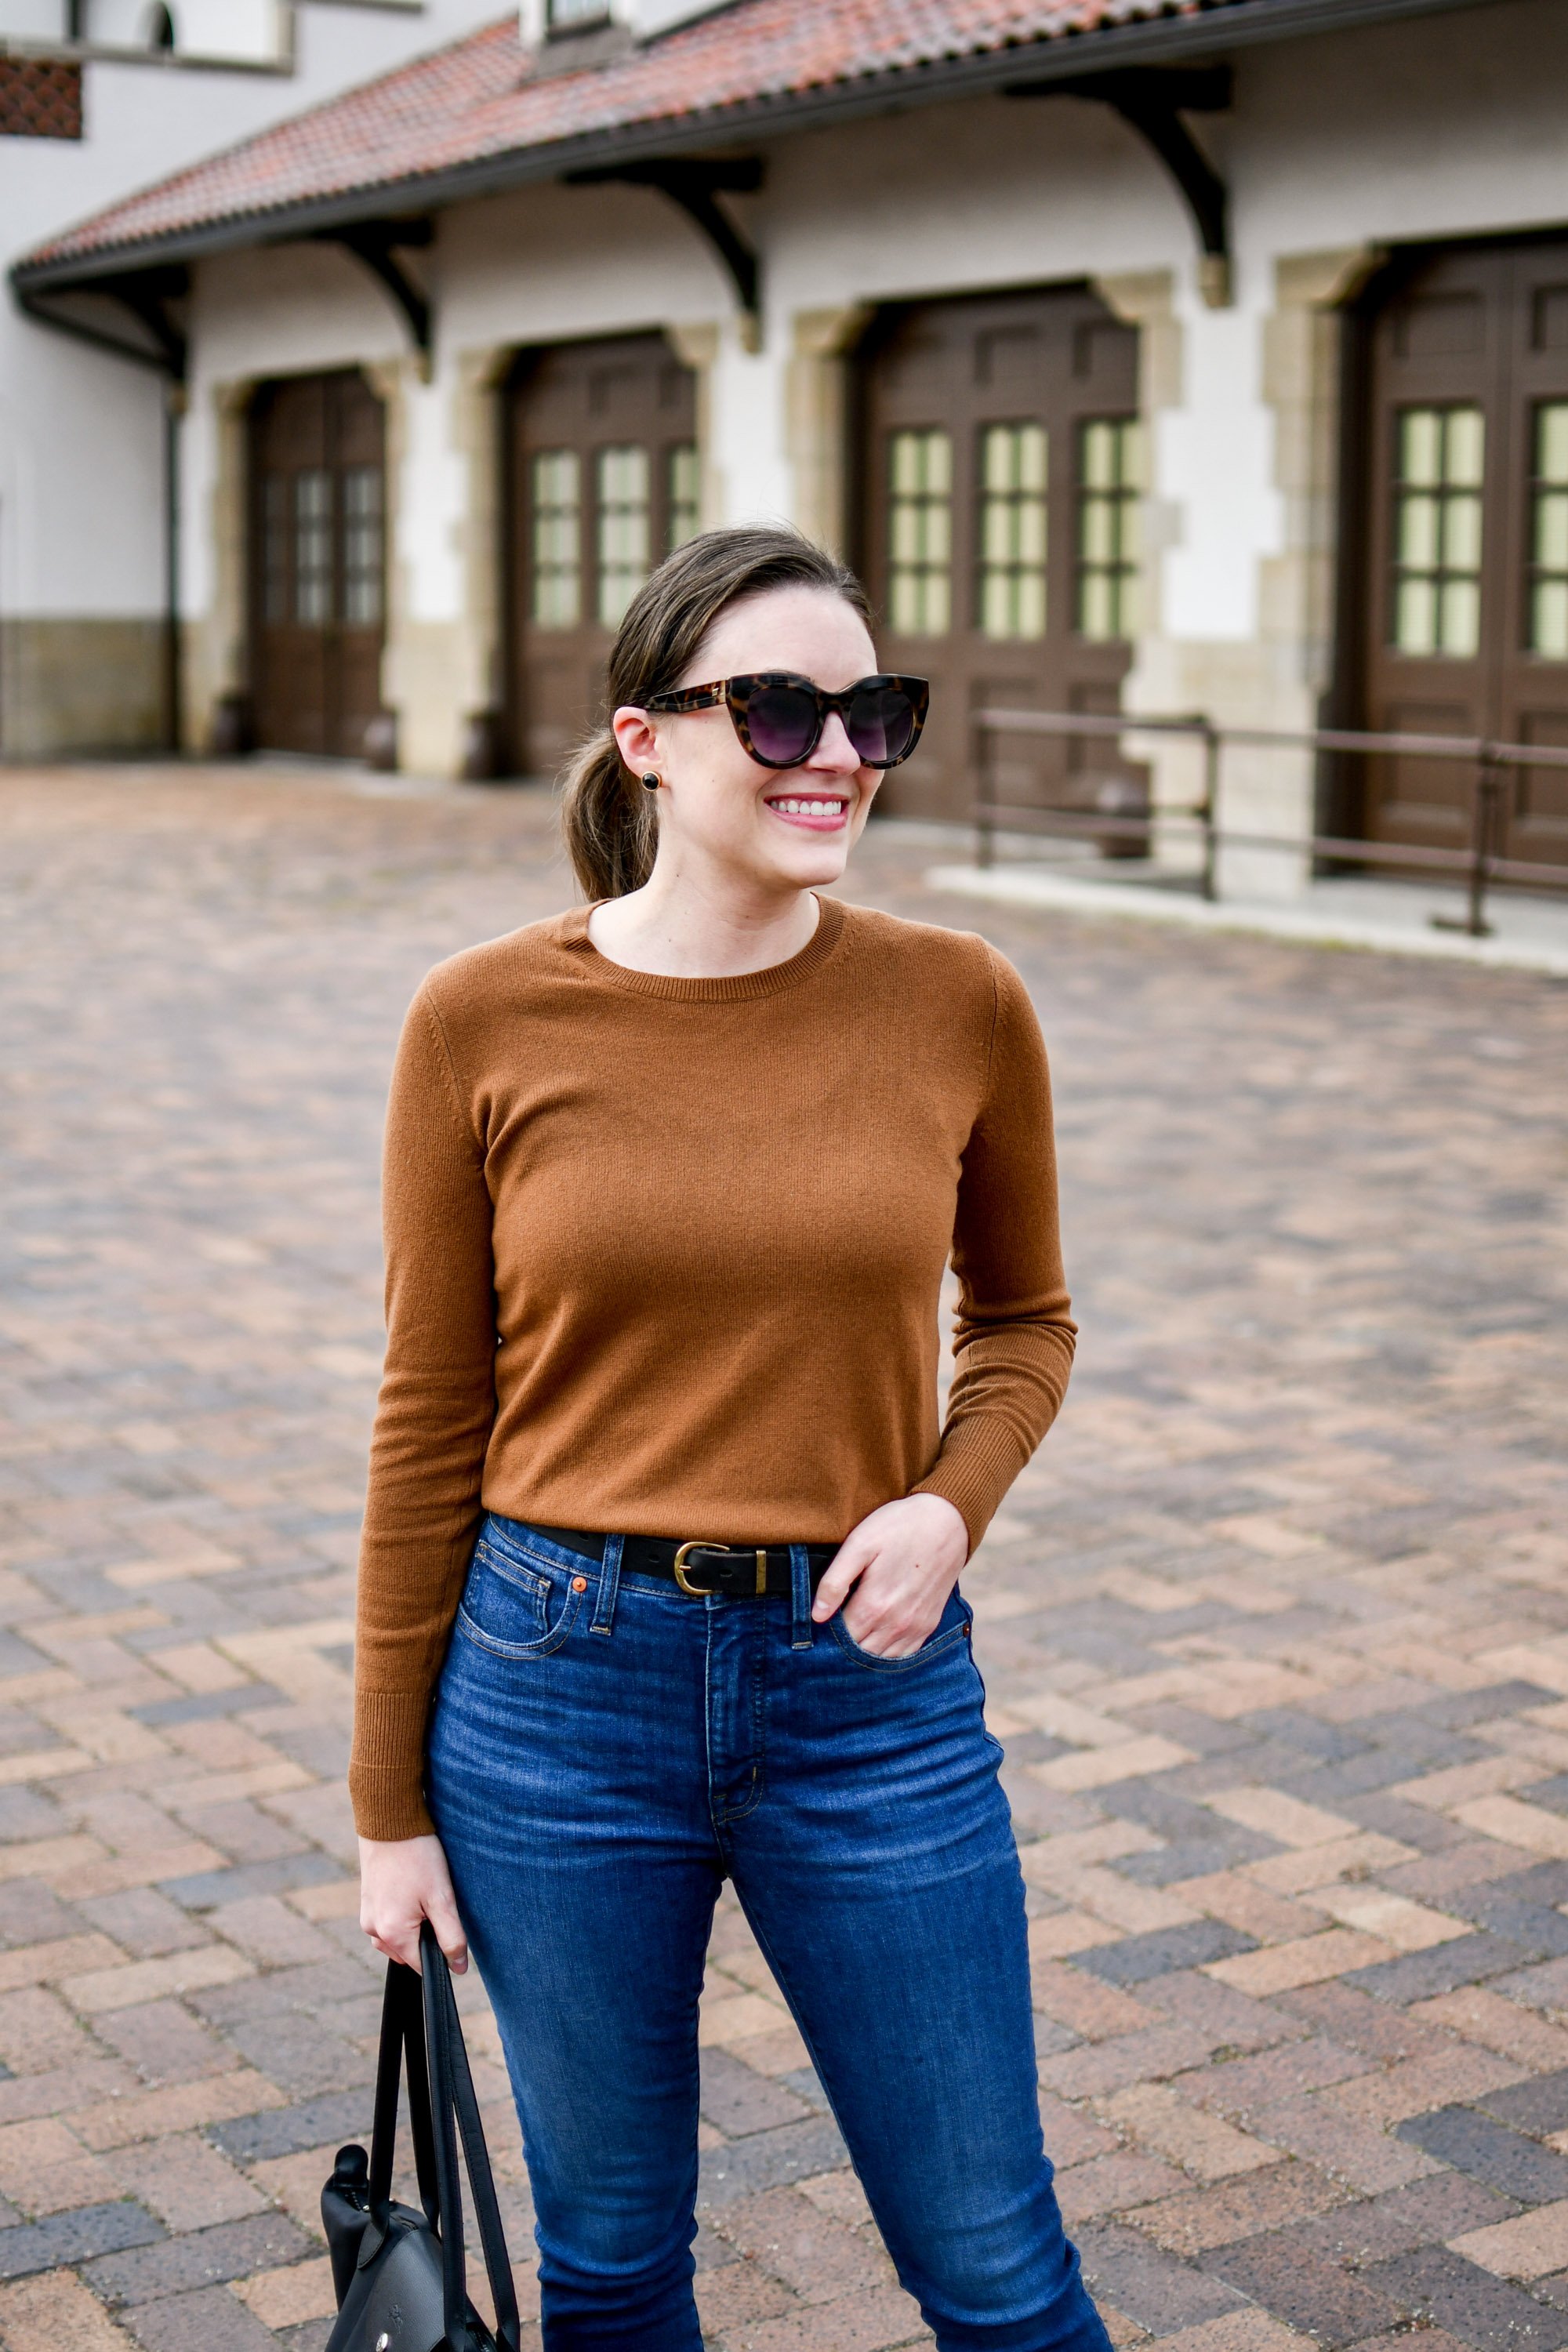 How I'm Changing Up My Style This Year - Cashmere & Jeans